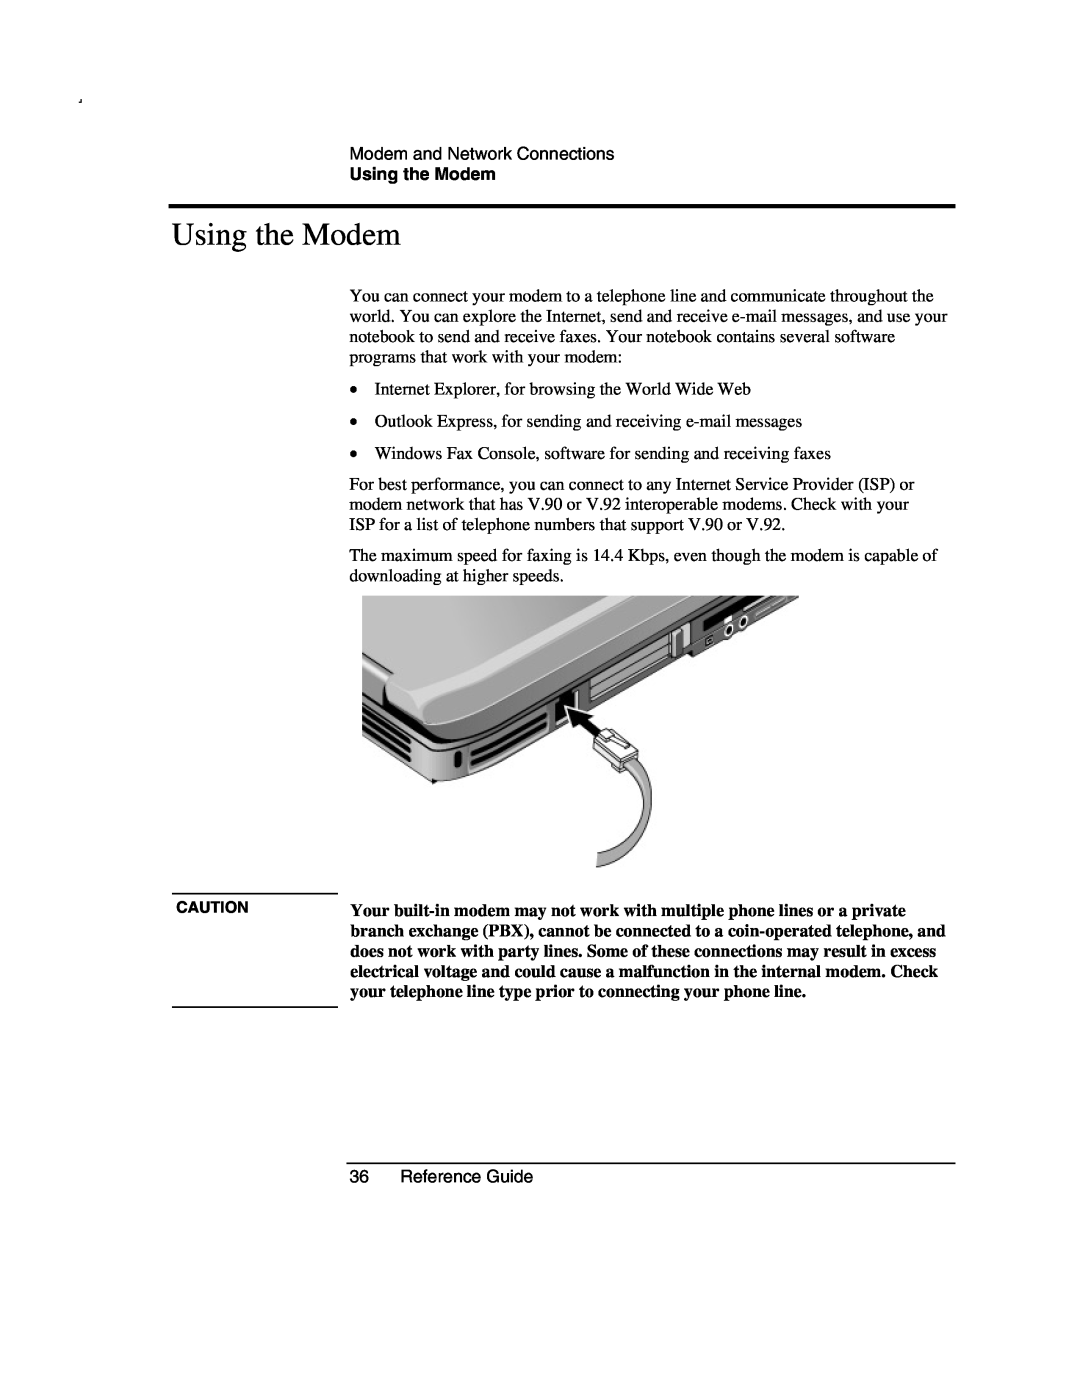 Compaq AMC20493-KT5 manual Using the Modem, your telephone line type prior to connecting your phone line 